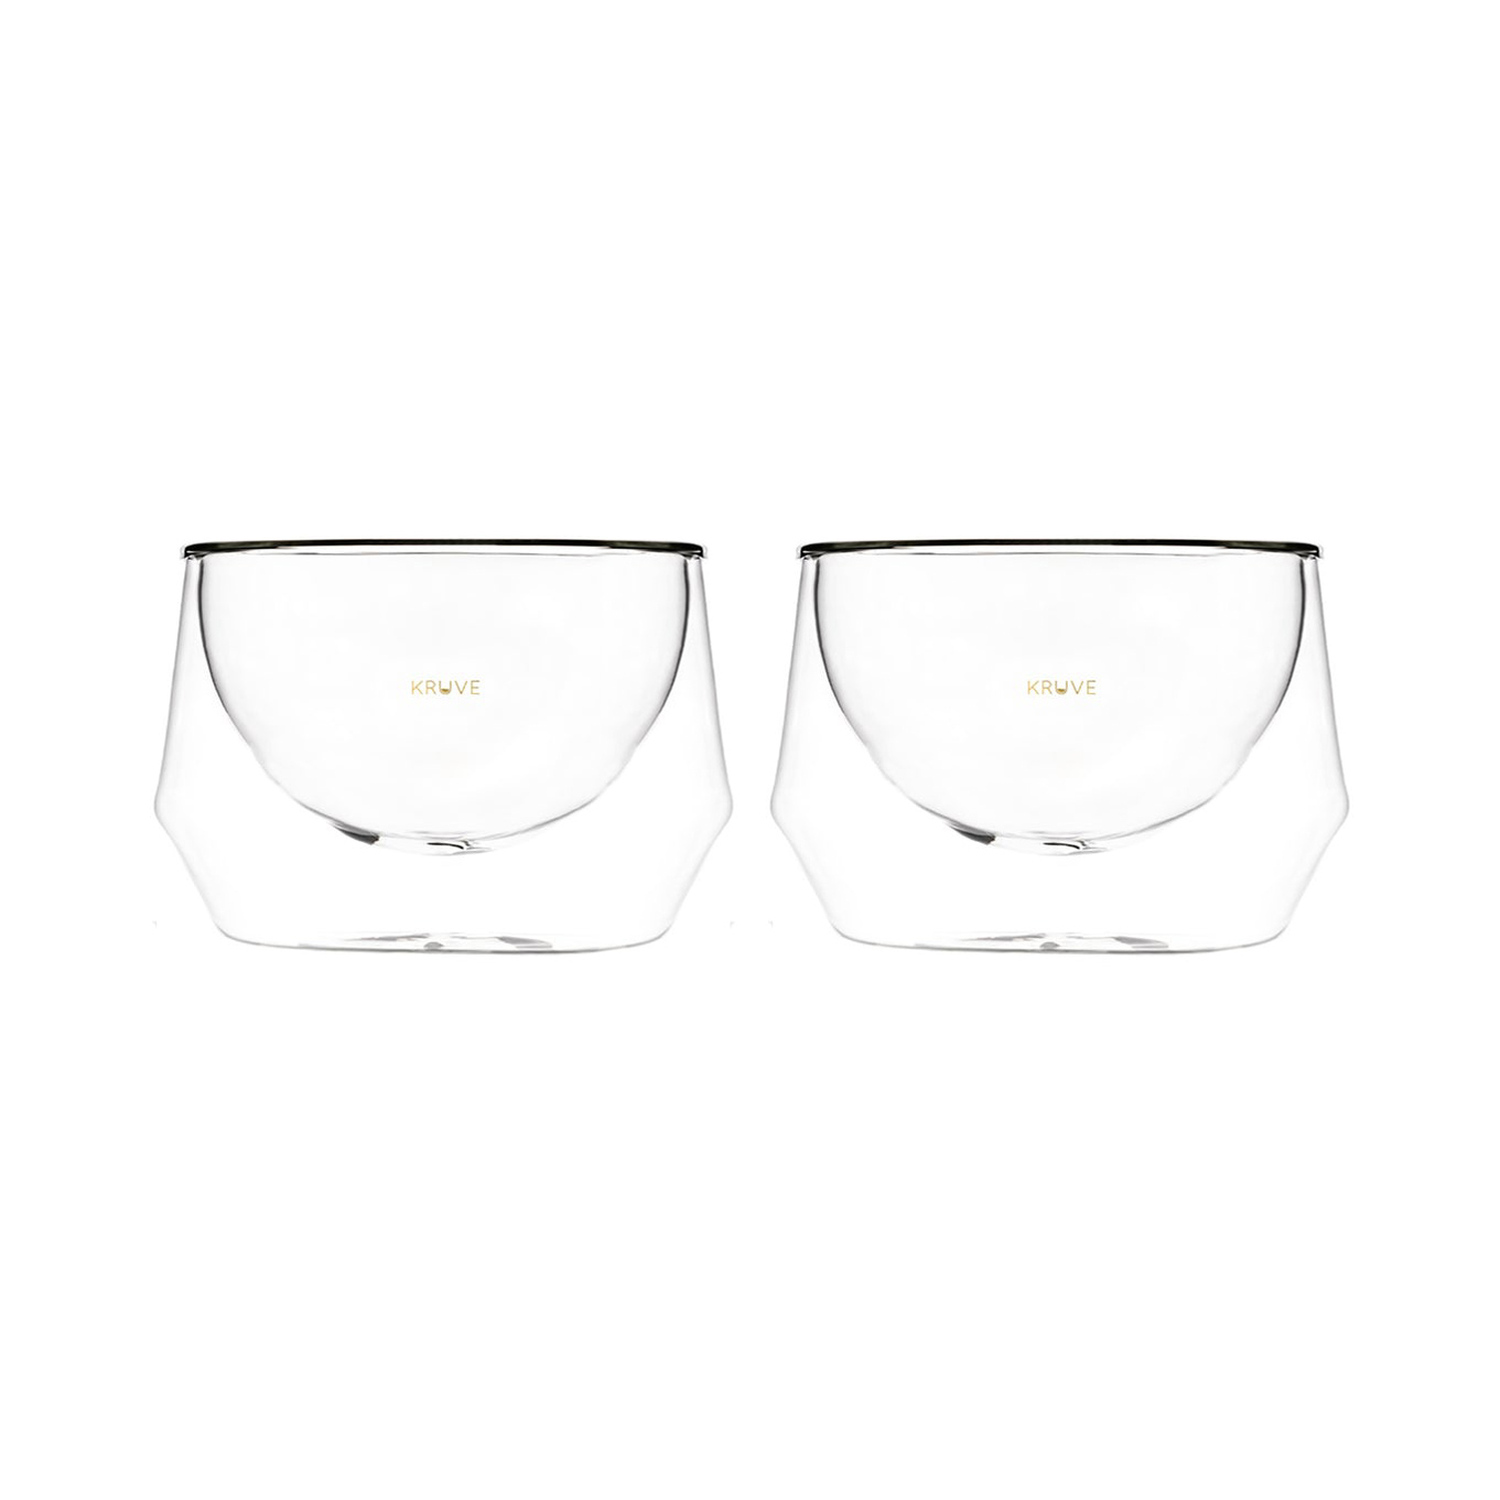 IMAGINE Milk Drink Glass, Hand Made, Double-wall, Set of Two (6.5oz/200ml  Cappuccino)